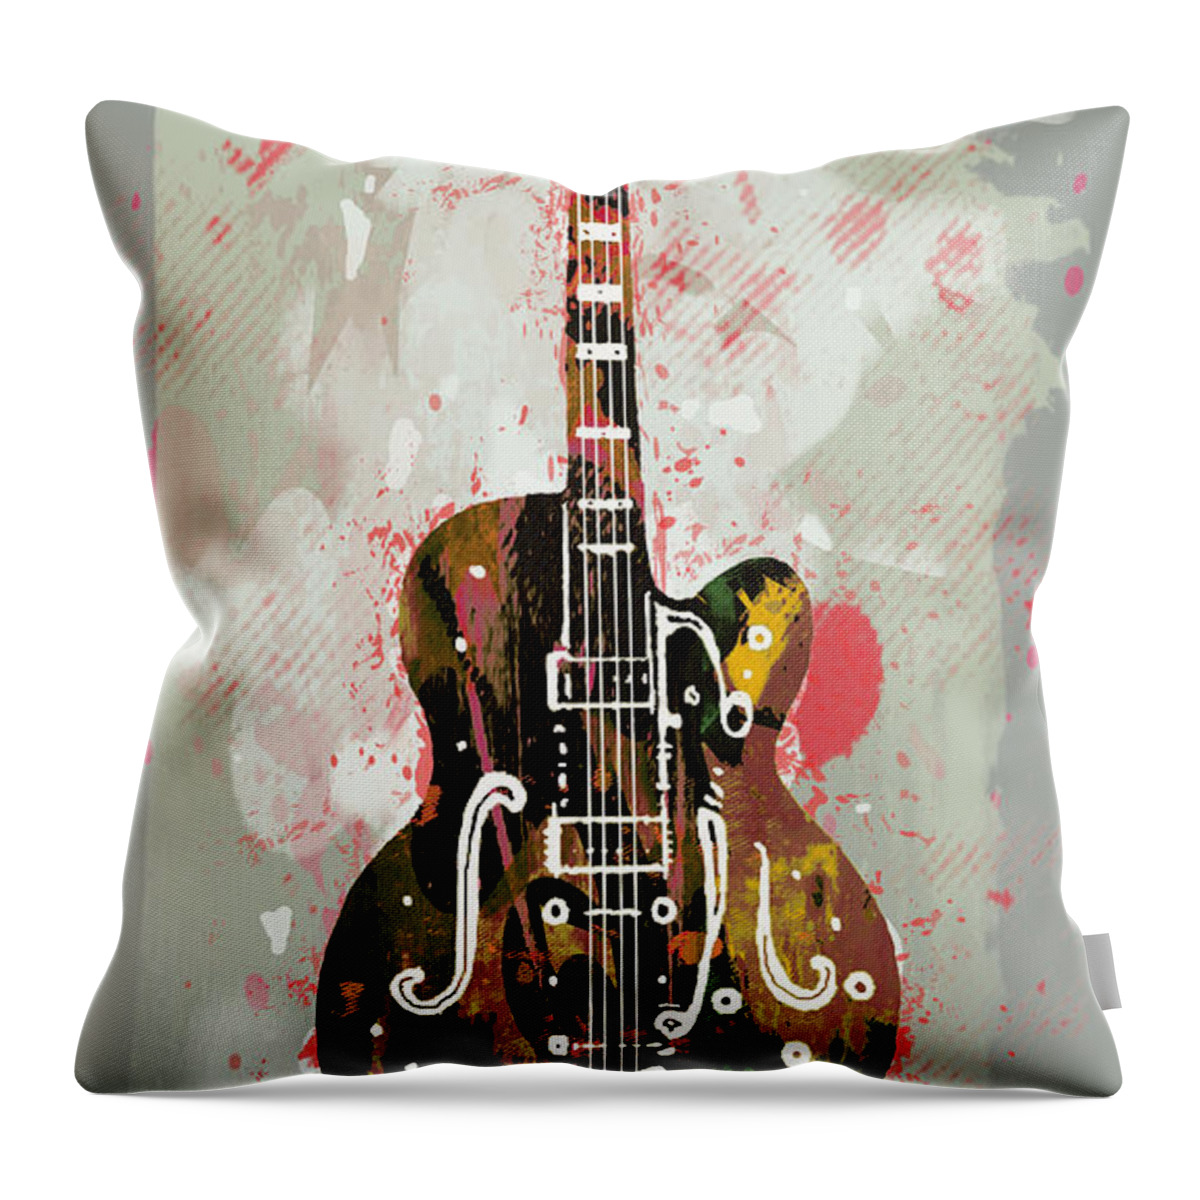 The Guitar Is A Popular Musical Instrument Classified As A String Instrument With Anywhere From 4 To 18 Strings Throw Pillow featuring the drawing Guitar stylised pop art poster by Kim Wang